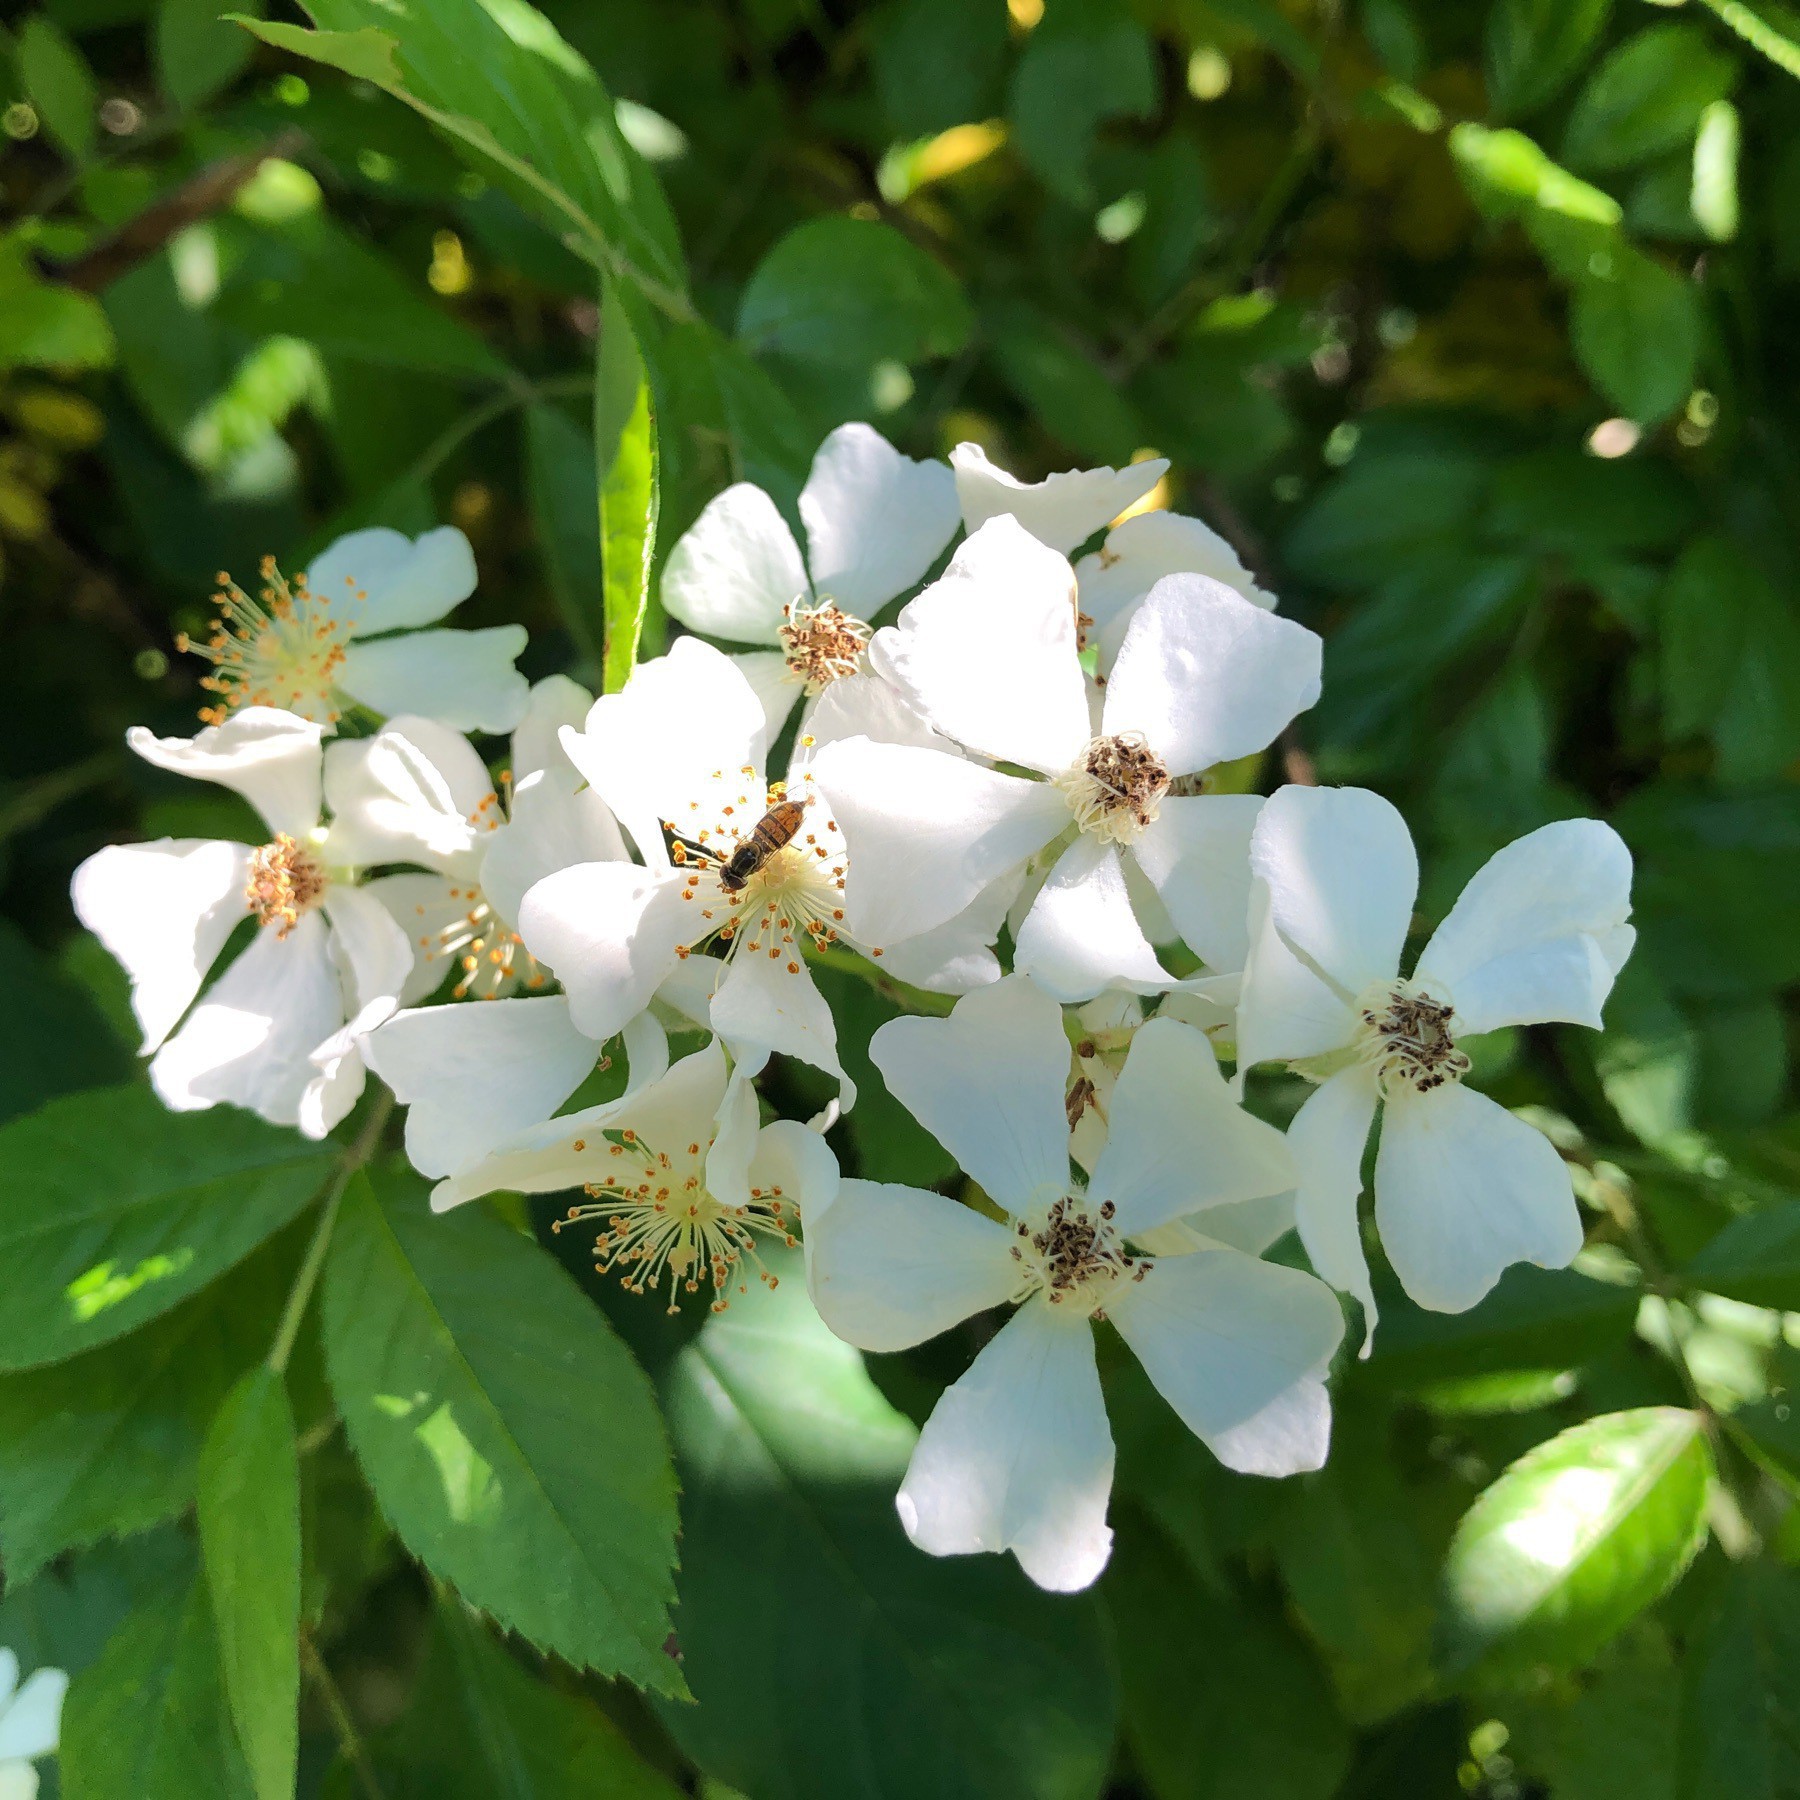 Small white flowers on a bush.